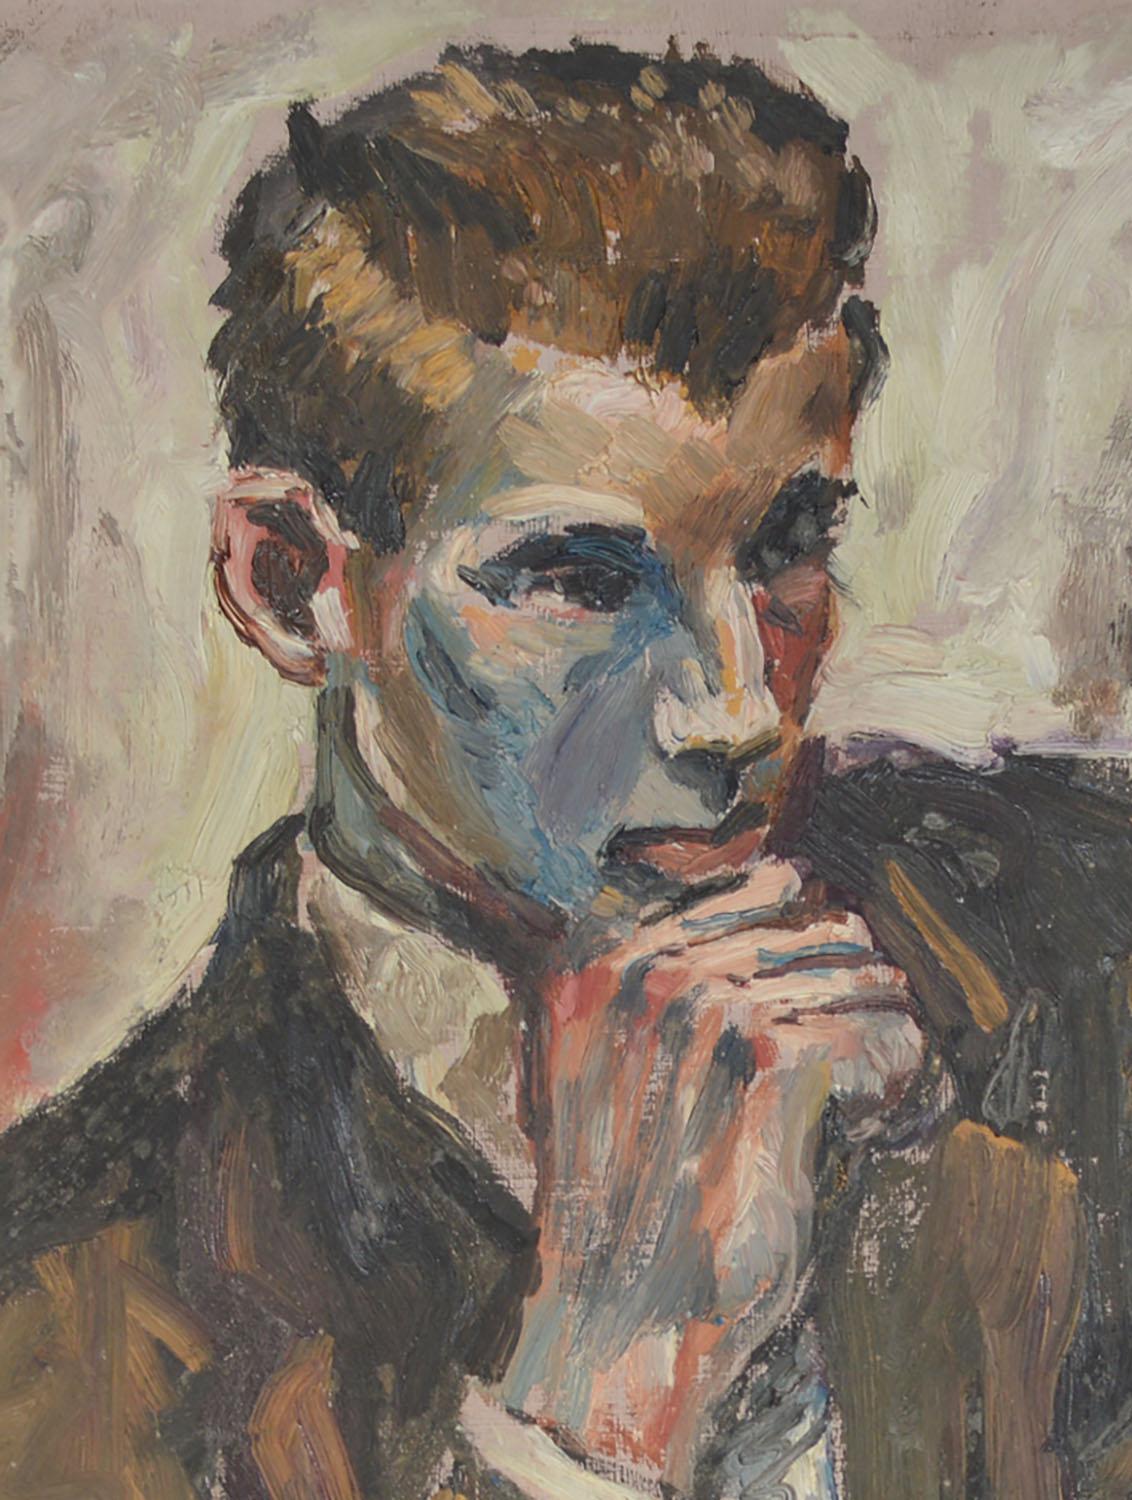 Expressionist Portrait of a Young Man, Brian Vale, 1959